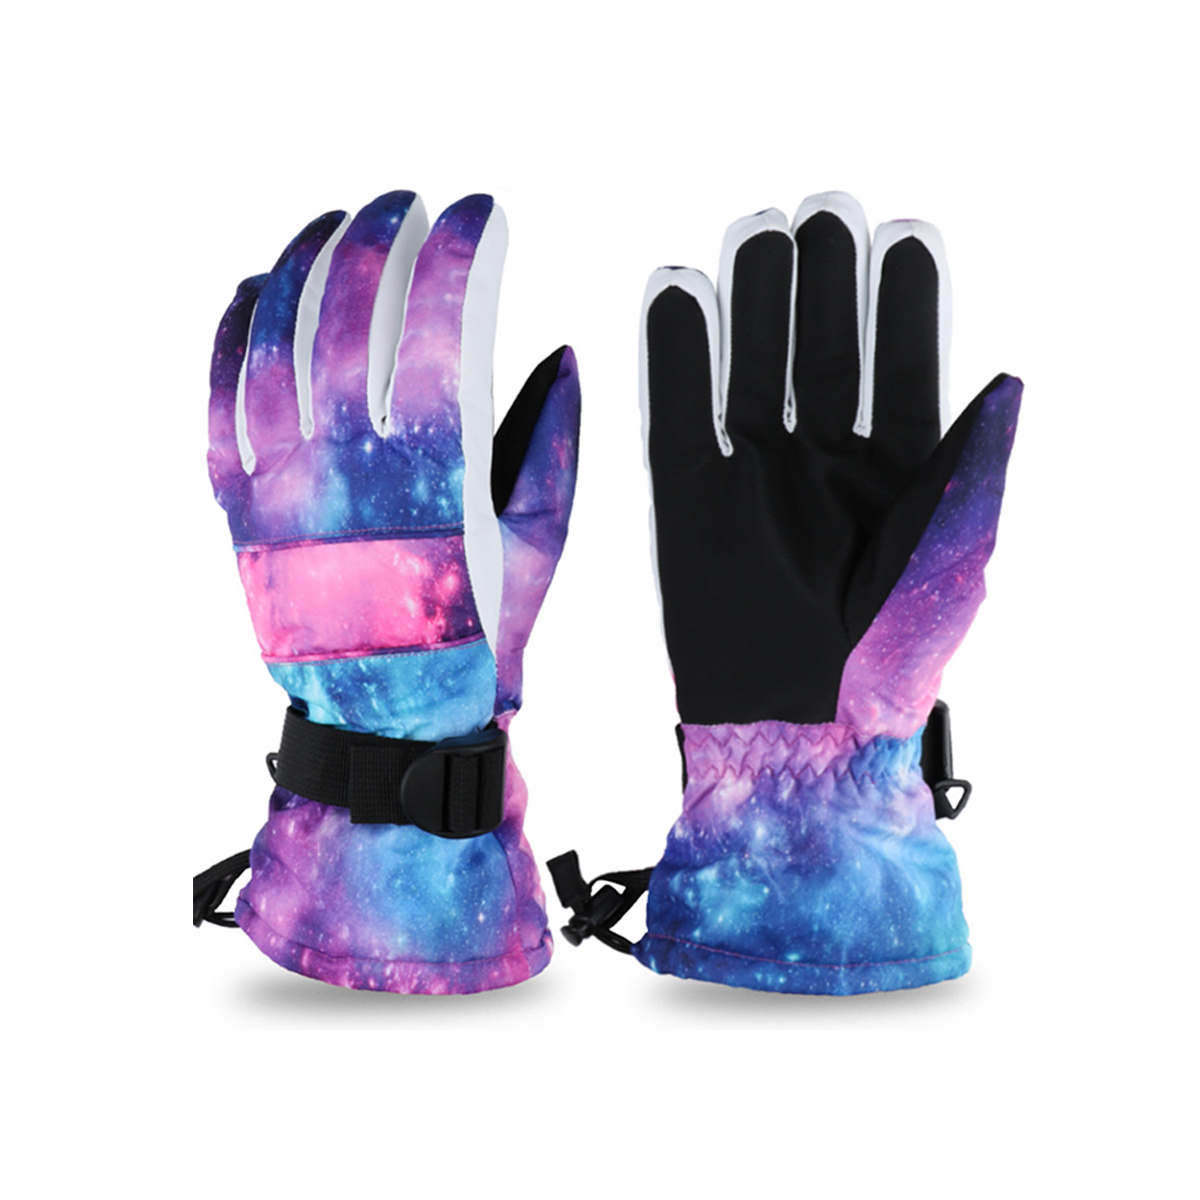 Woman-and-Man-Waterproof-Flannel-Skiing-Gloves-Outdoor-Camping-Hiking-Climbing-Winter-Warm-Gloves-Sp-1603717-7